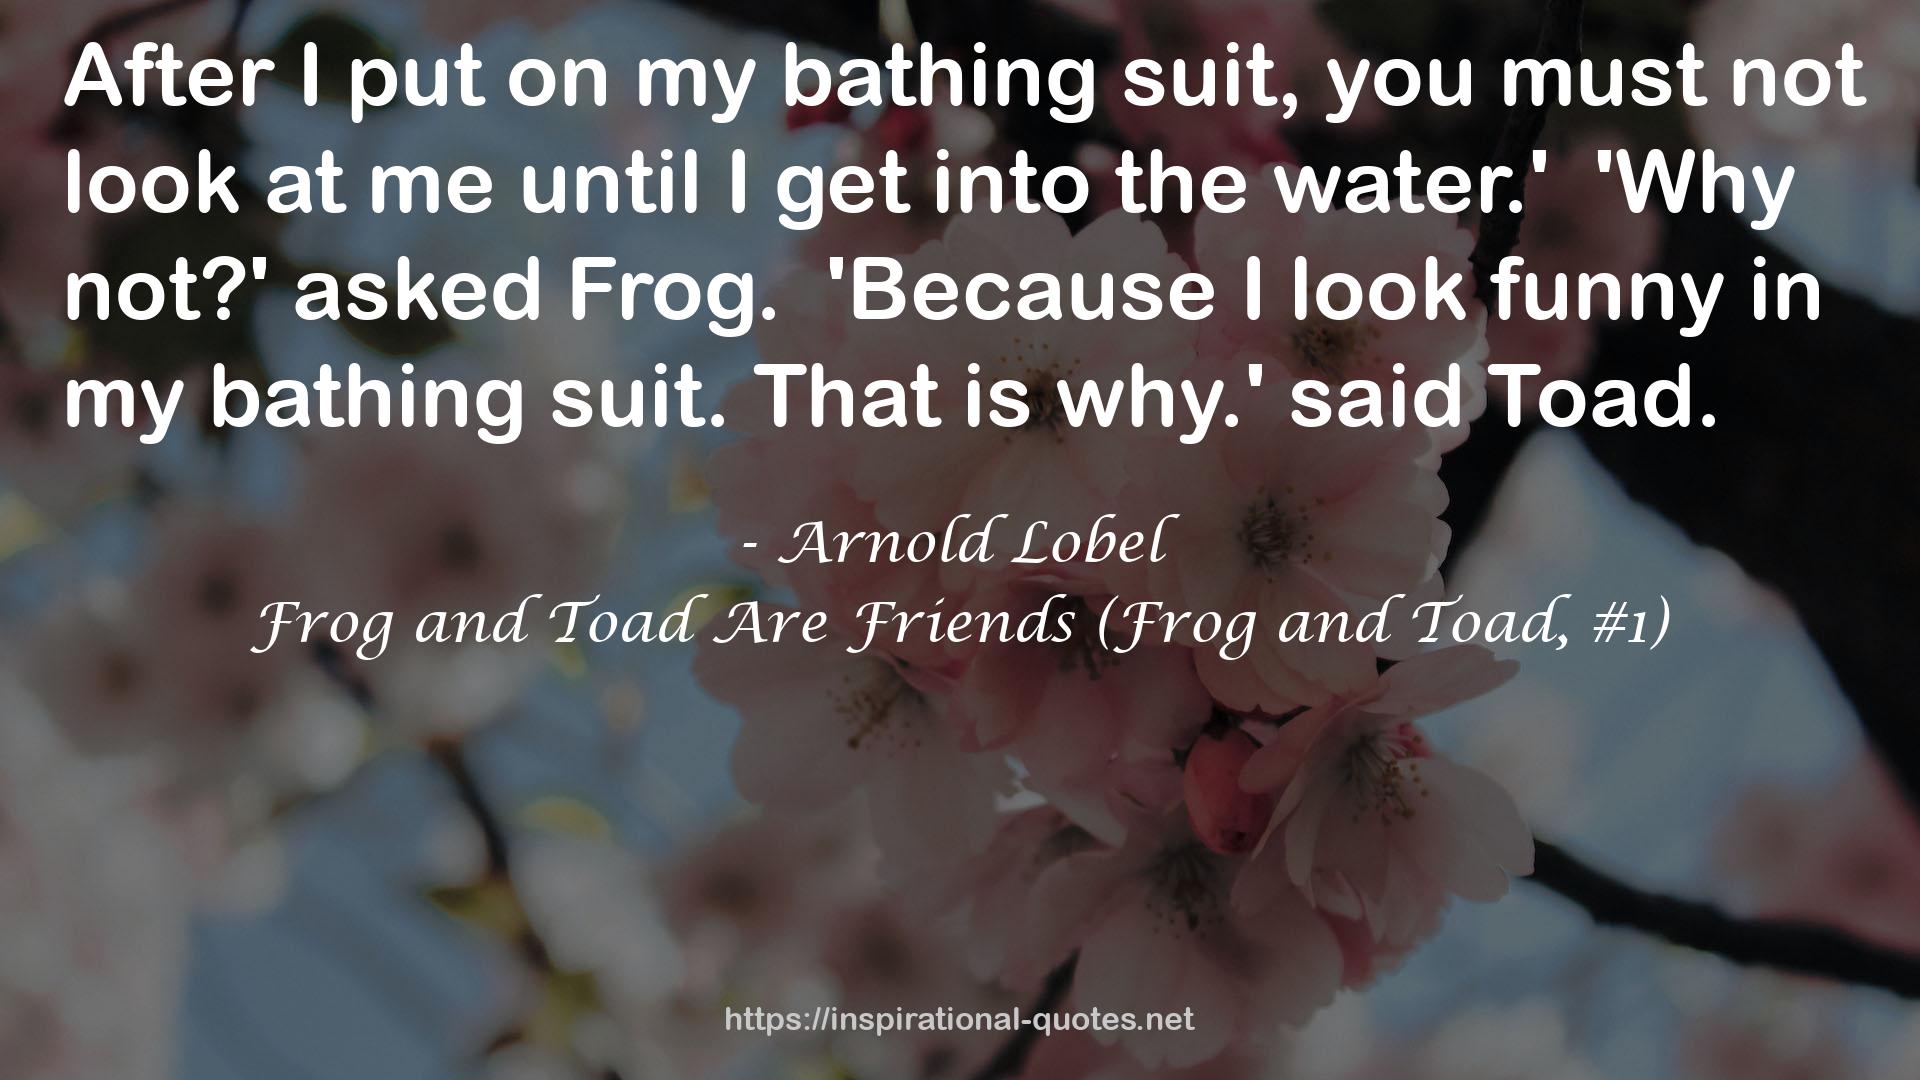 Frog and Toad Are Friends (Frog and Toad, #1) QUOTES